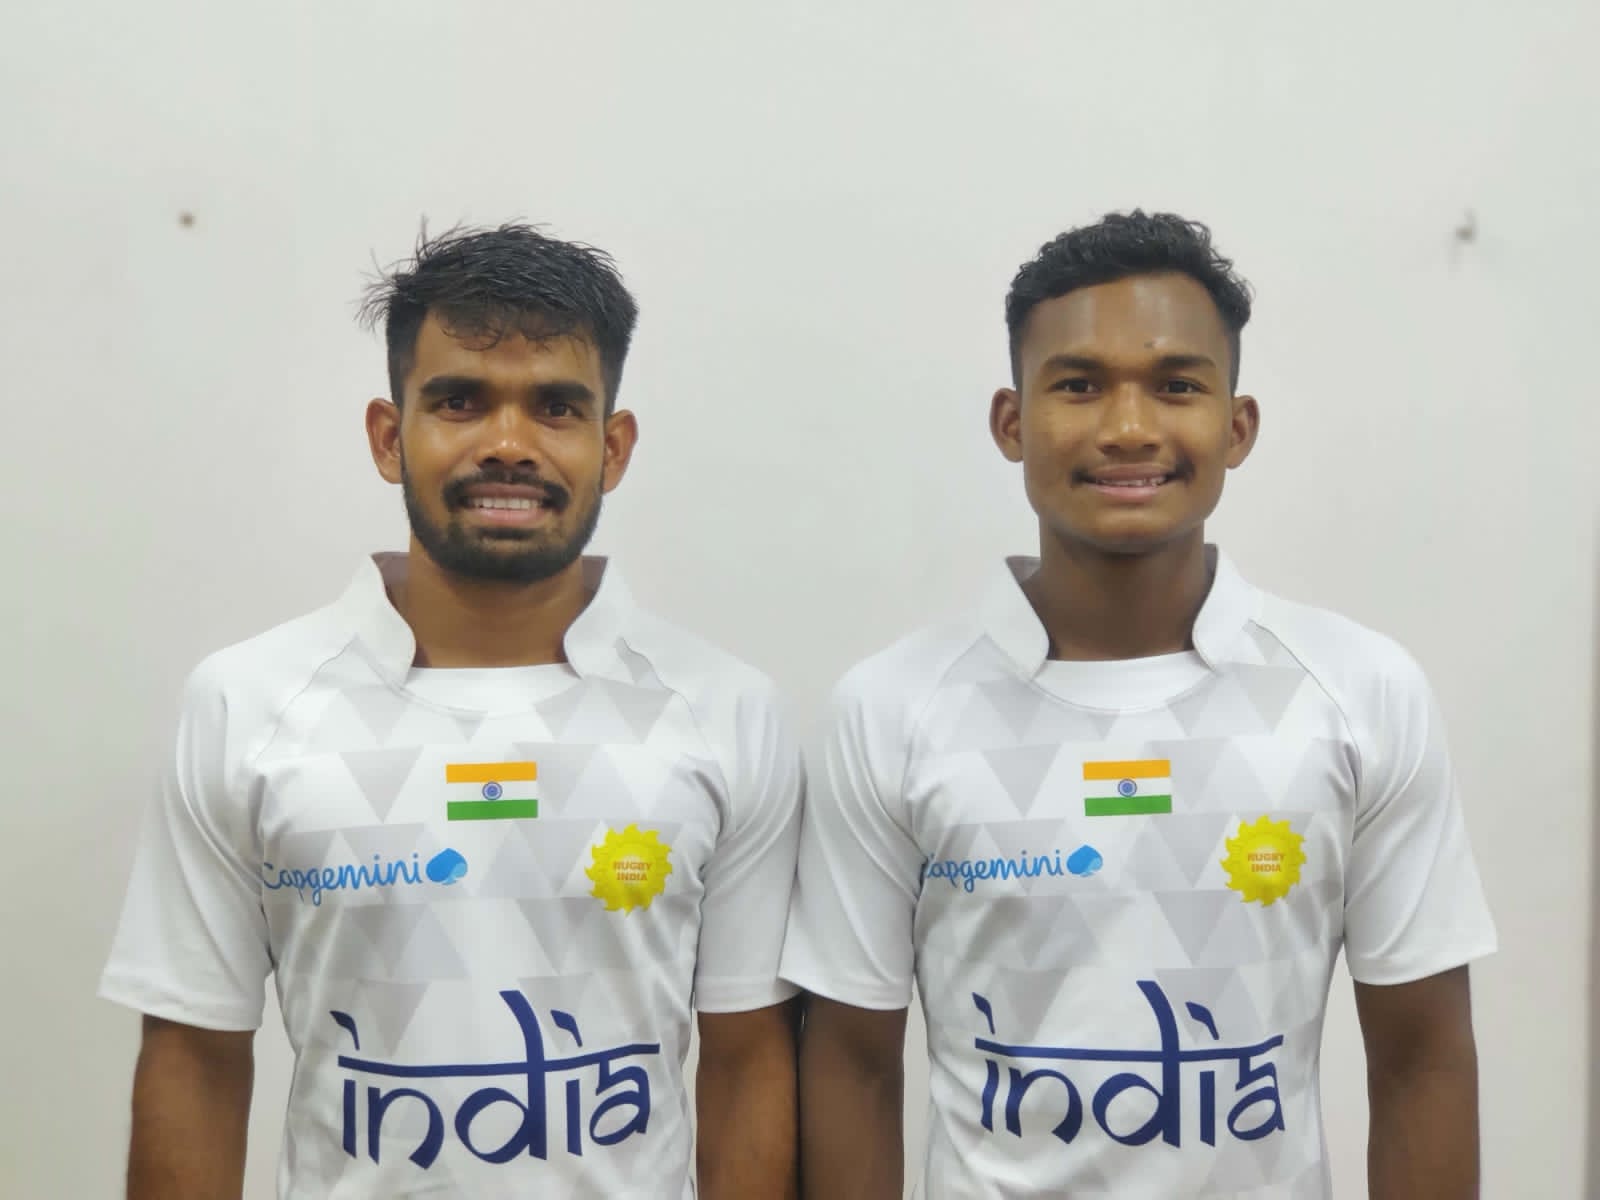 Odisha duo for Asian rugby meet